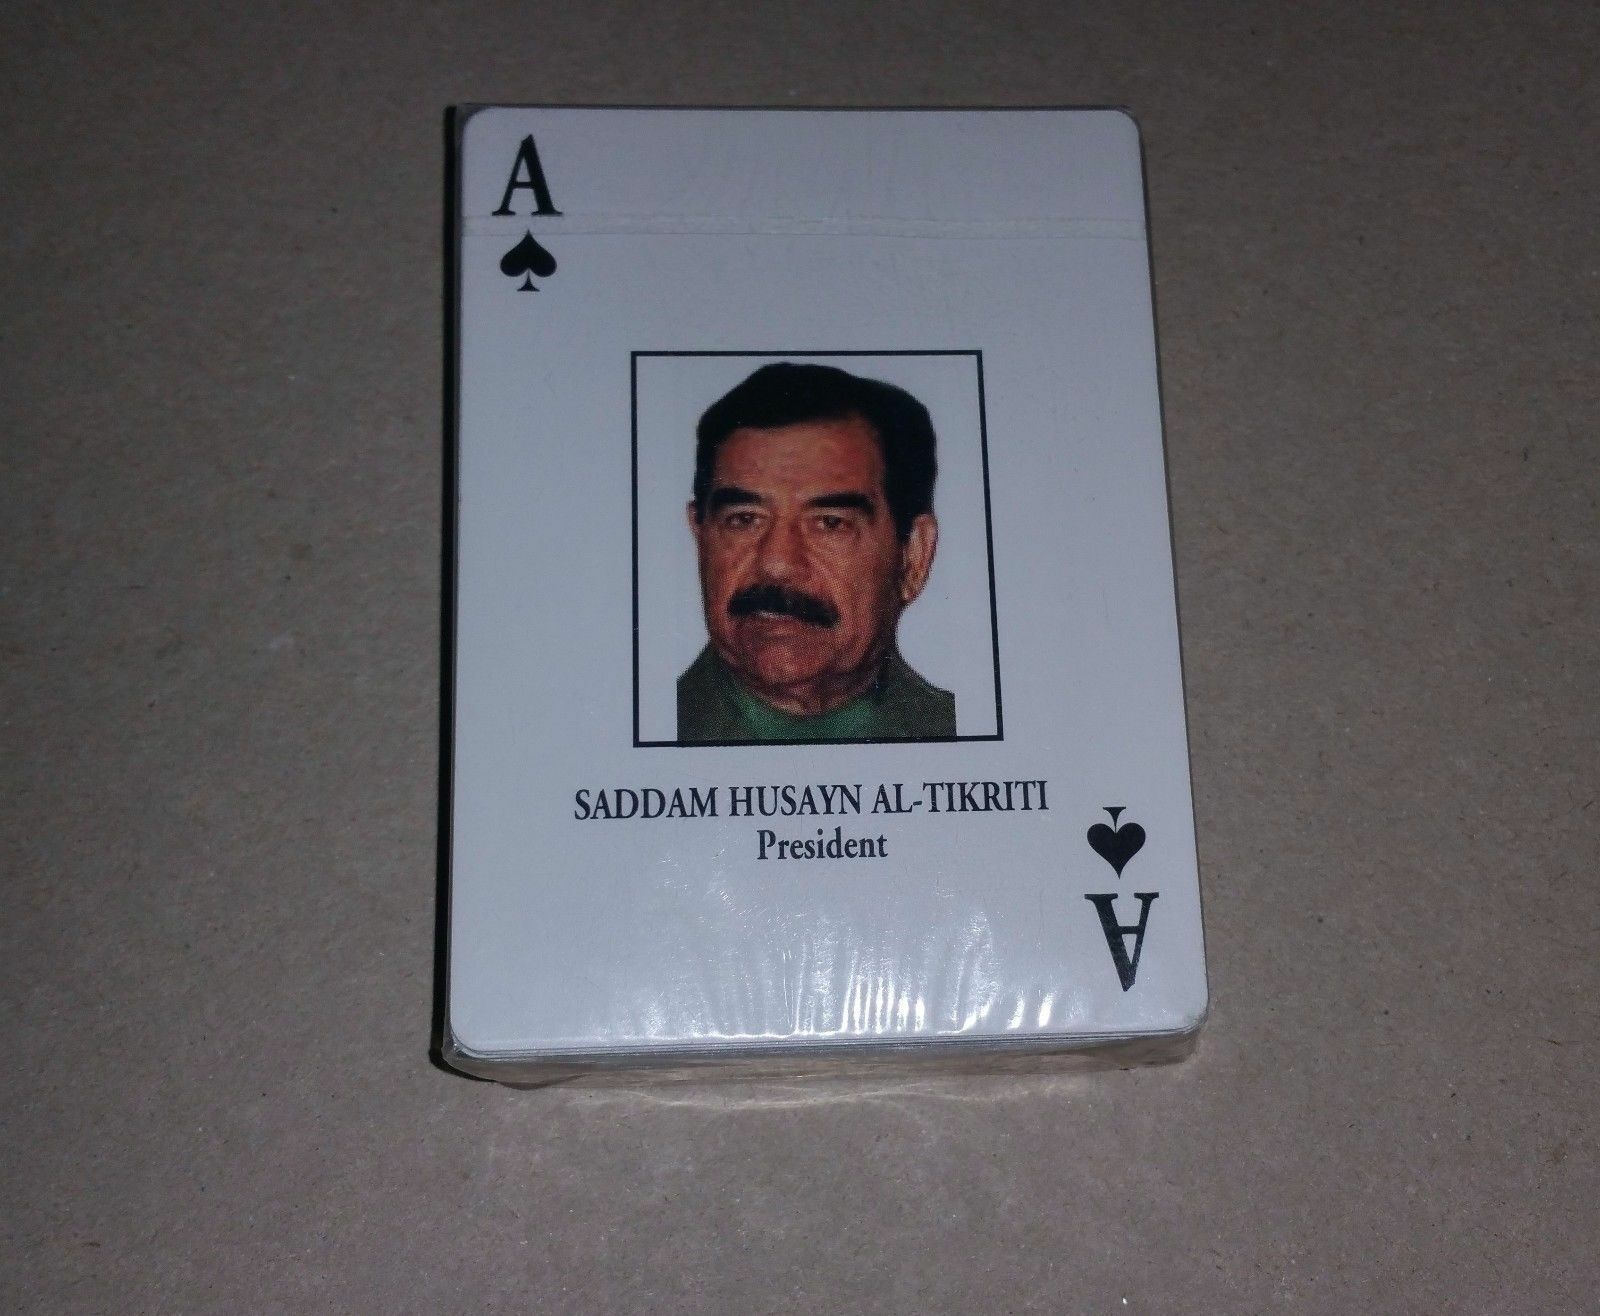 Primary image for IRAQ WAR MOST WANTED 52 PLAYING CARDS - SADDAM HUSSEIN AL TIKRITTI